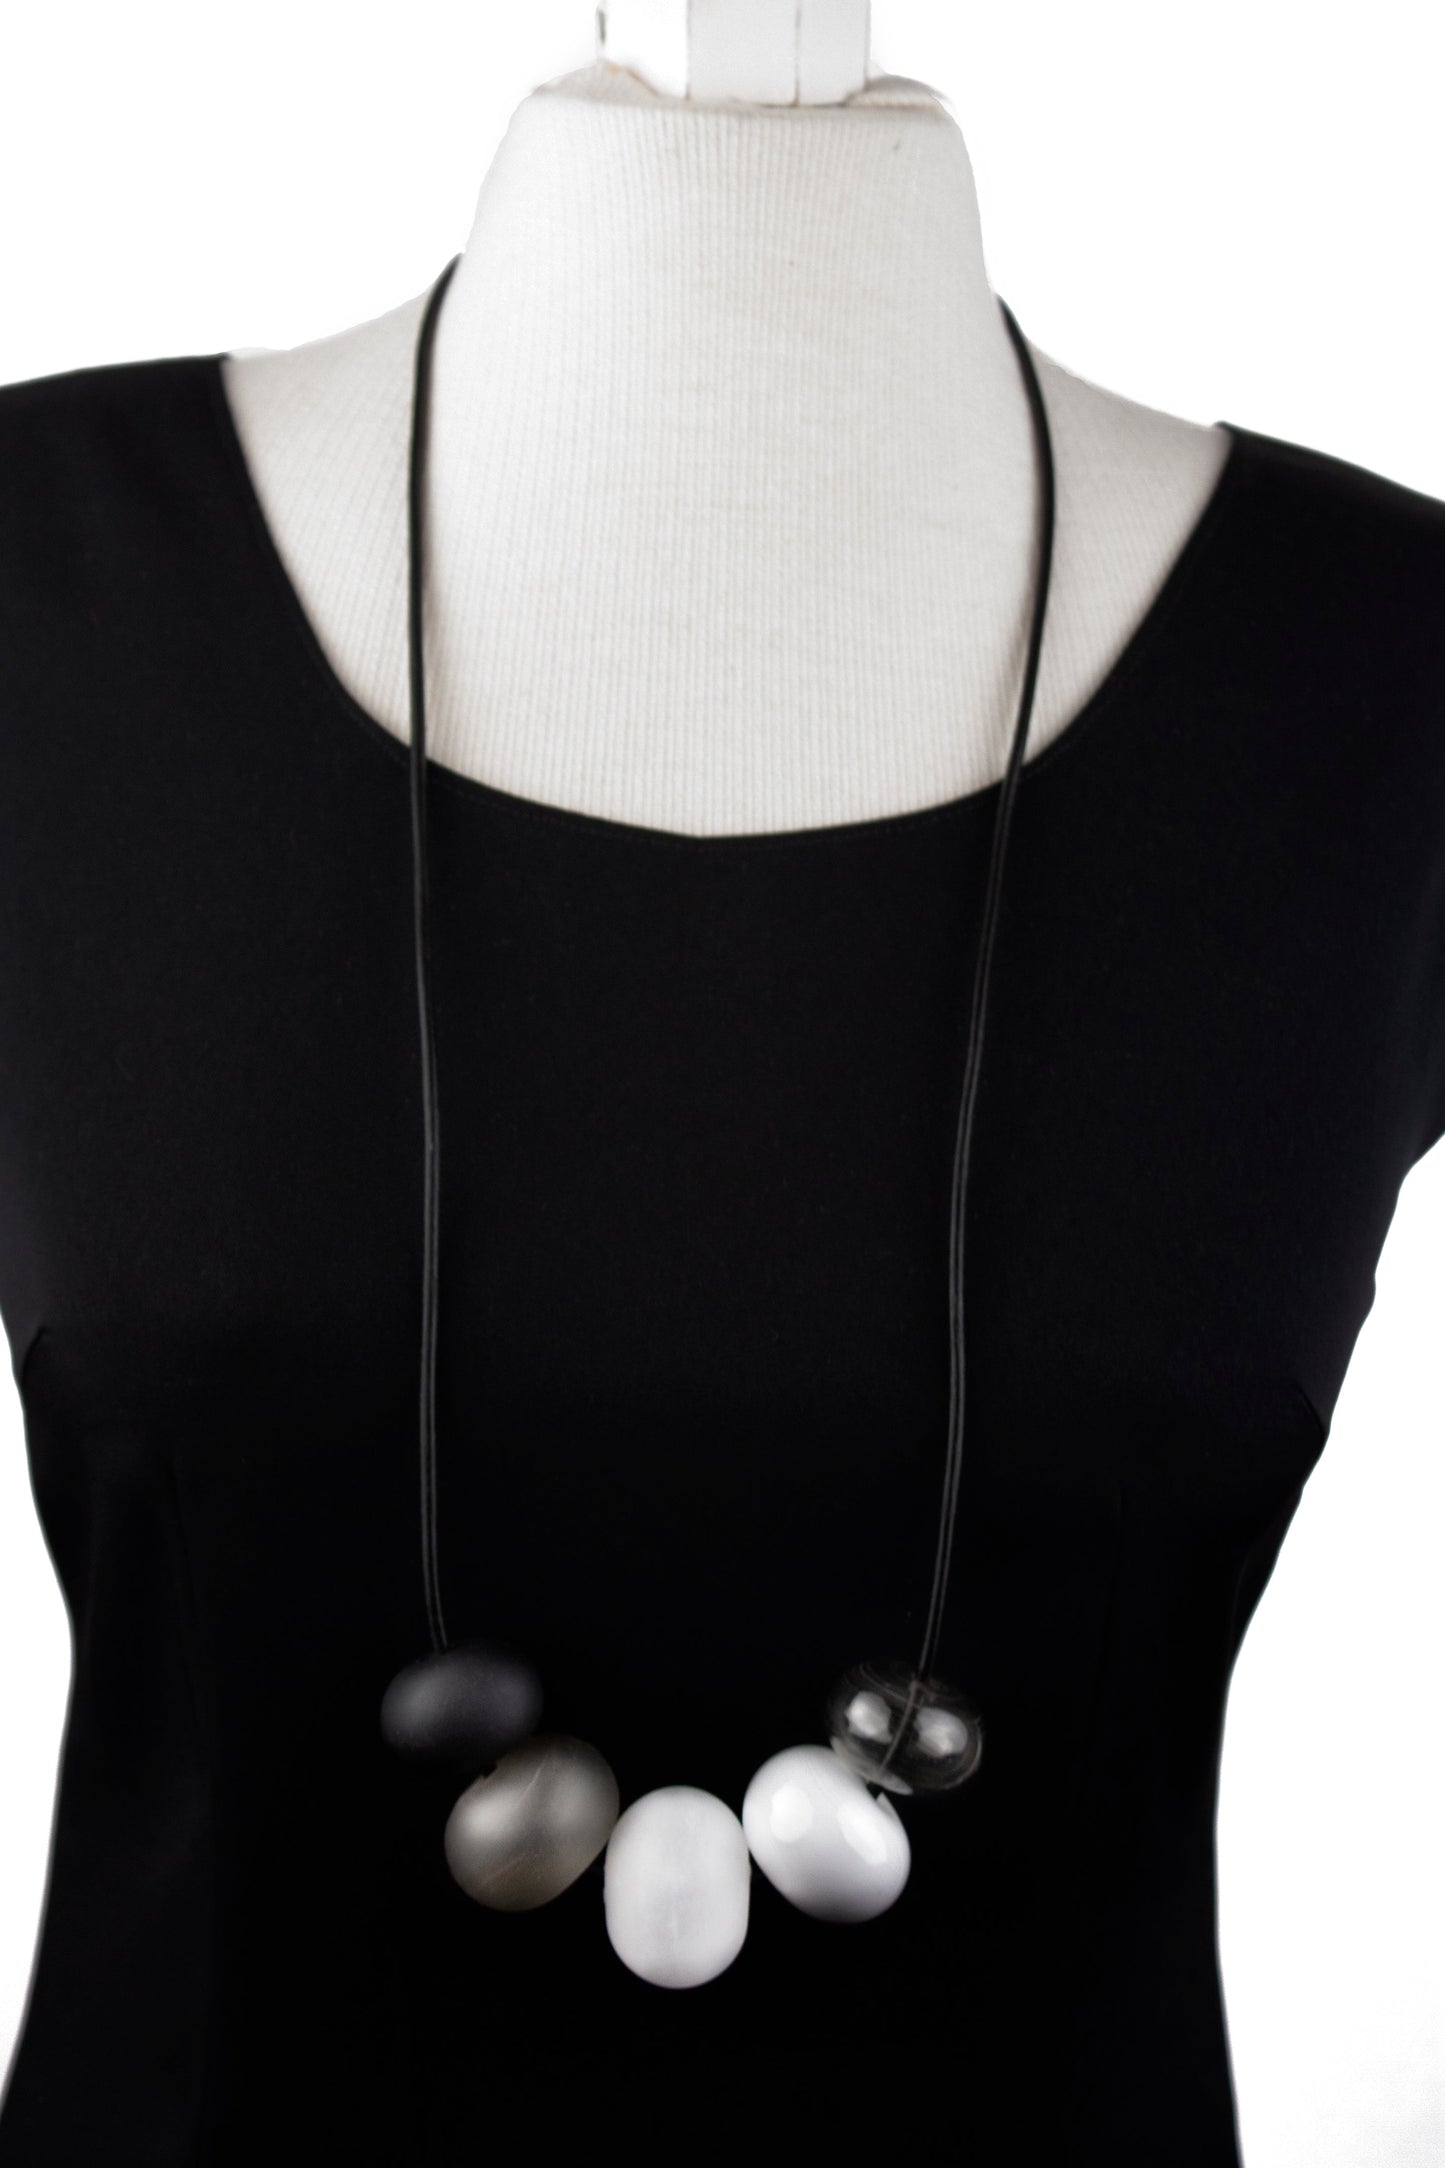 5 bubble bead necklace - black, white and gray